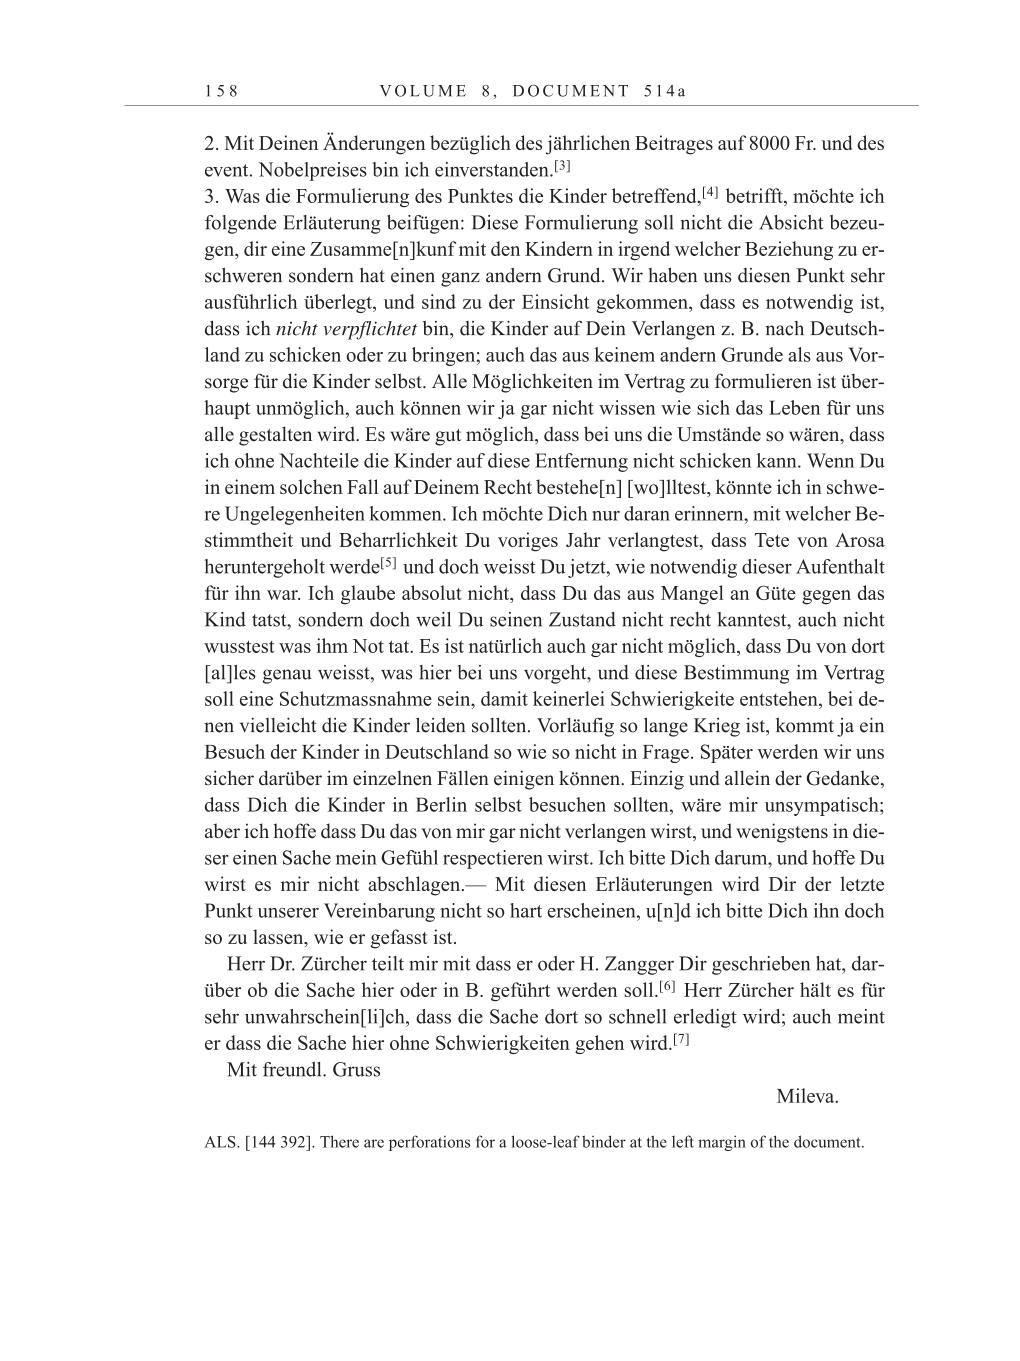 Volume 10: The Berlin Years: Correspondence May-December 1920 / Supplementary Correspondence 1909-1920 page 158